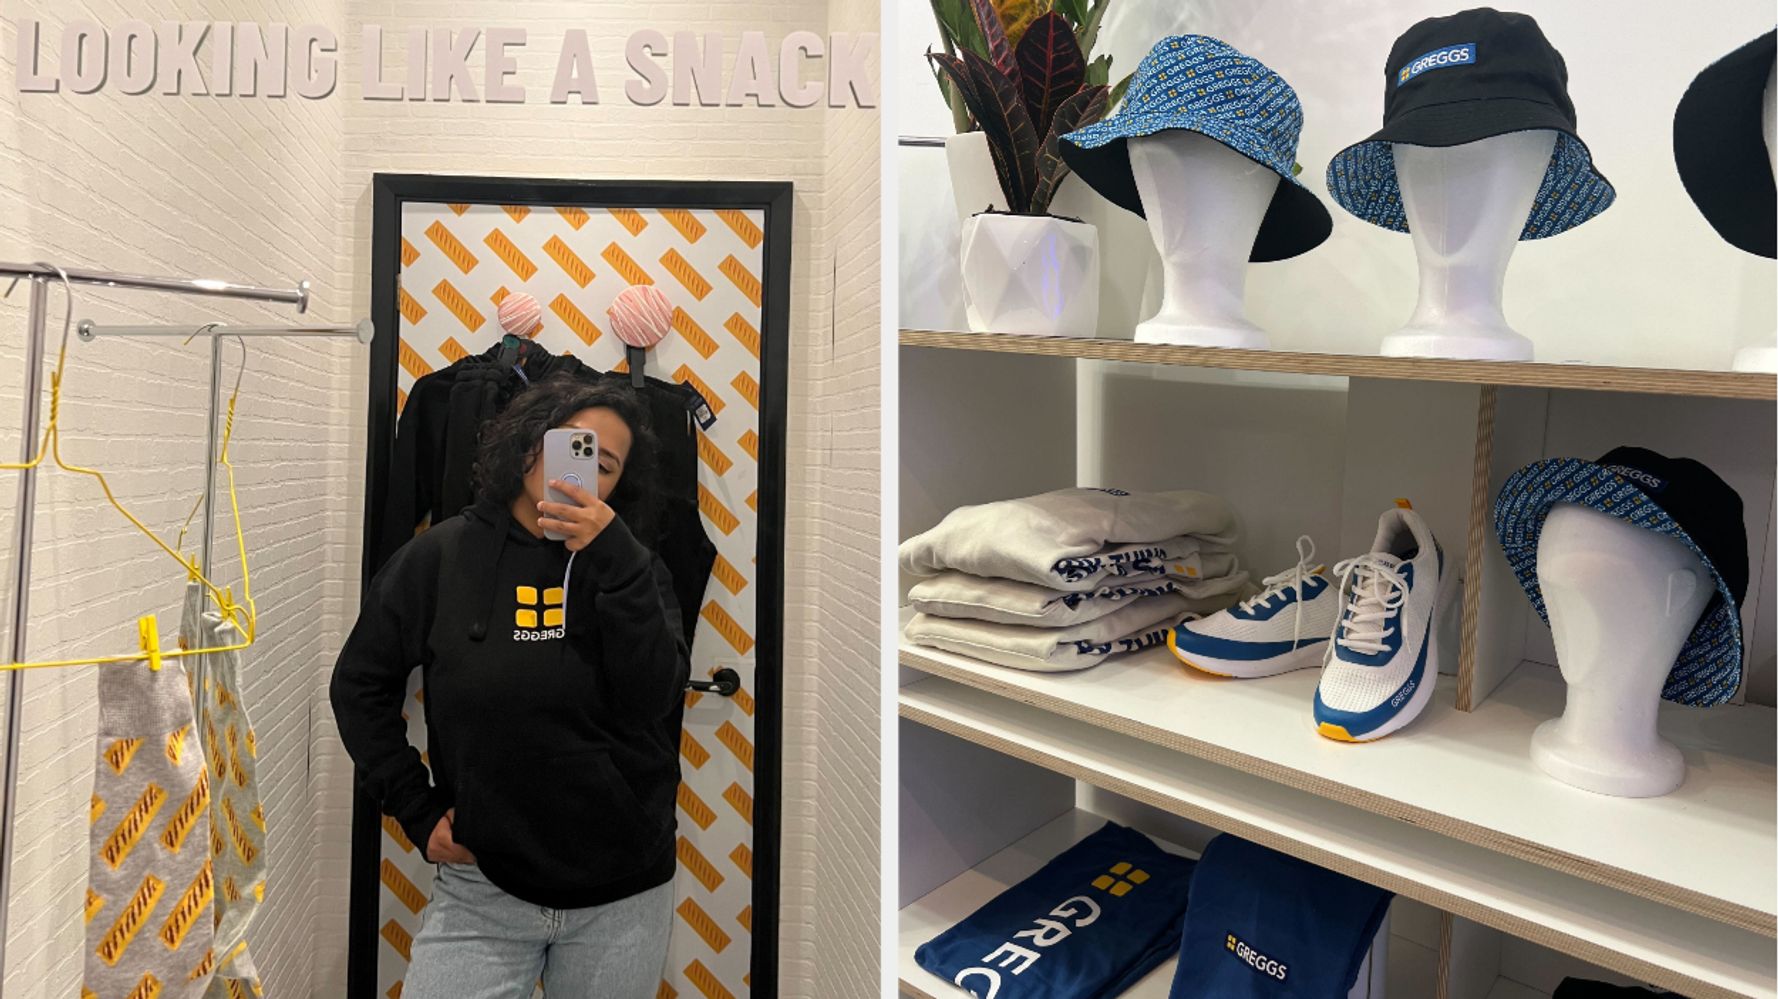 Greggs clothing collection at Primark: What's there and how much